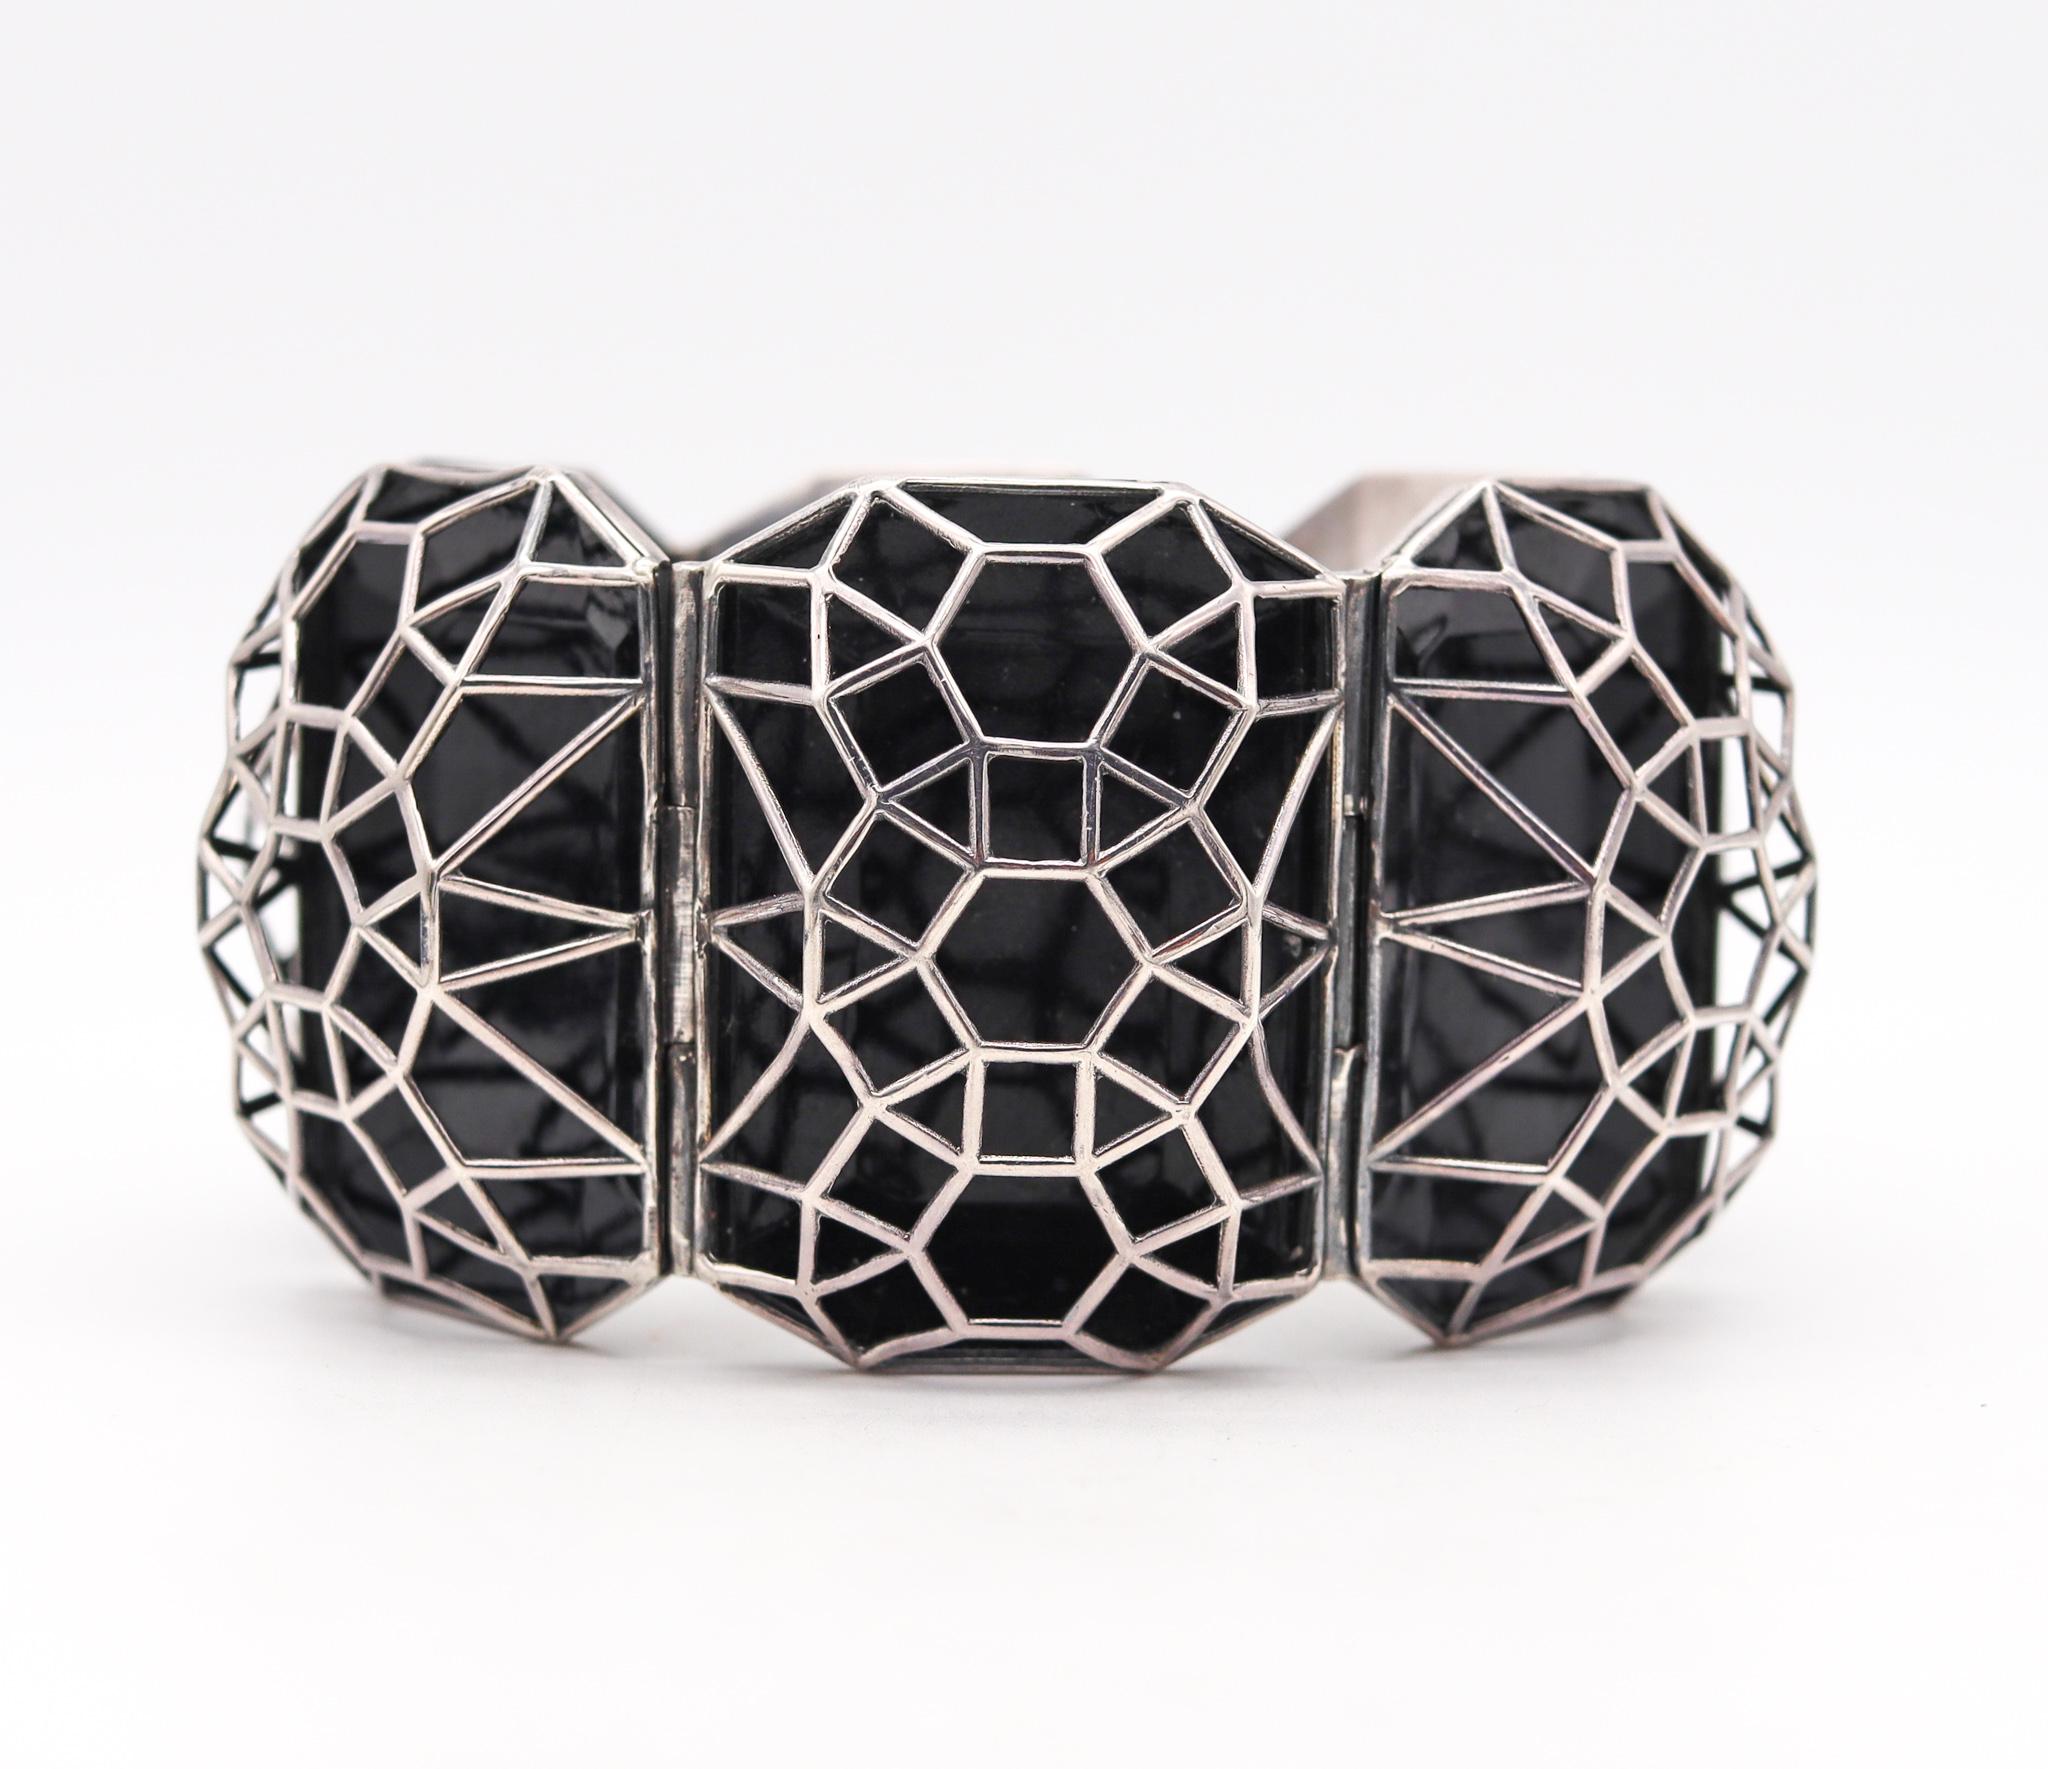 Three dimensional bracelet designed by Tomas Maier for Bottega Veneta.

Rare runaway piece, created by Tomas Maier back in the 2012 for the Italian luxury house of Bottega Veneta. Carefully crafted in solid .925/.999 sterling silver and composed by